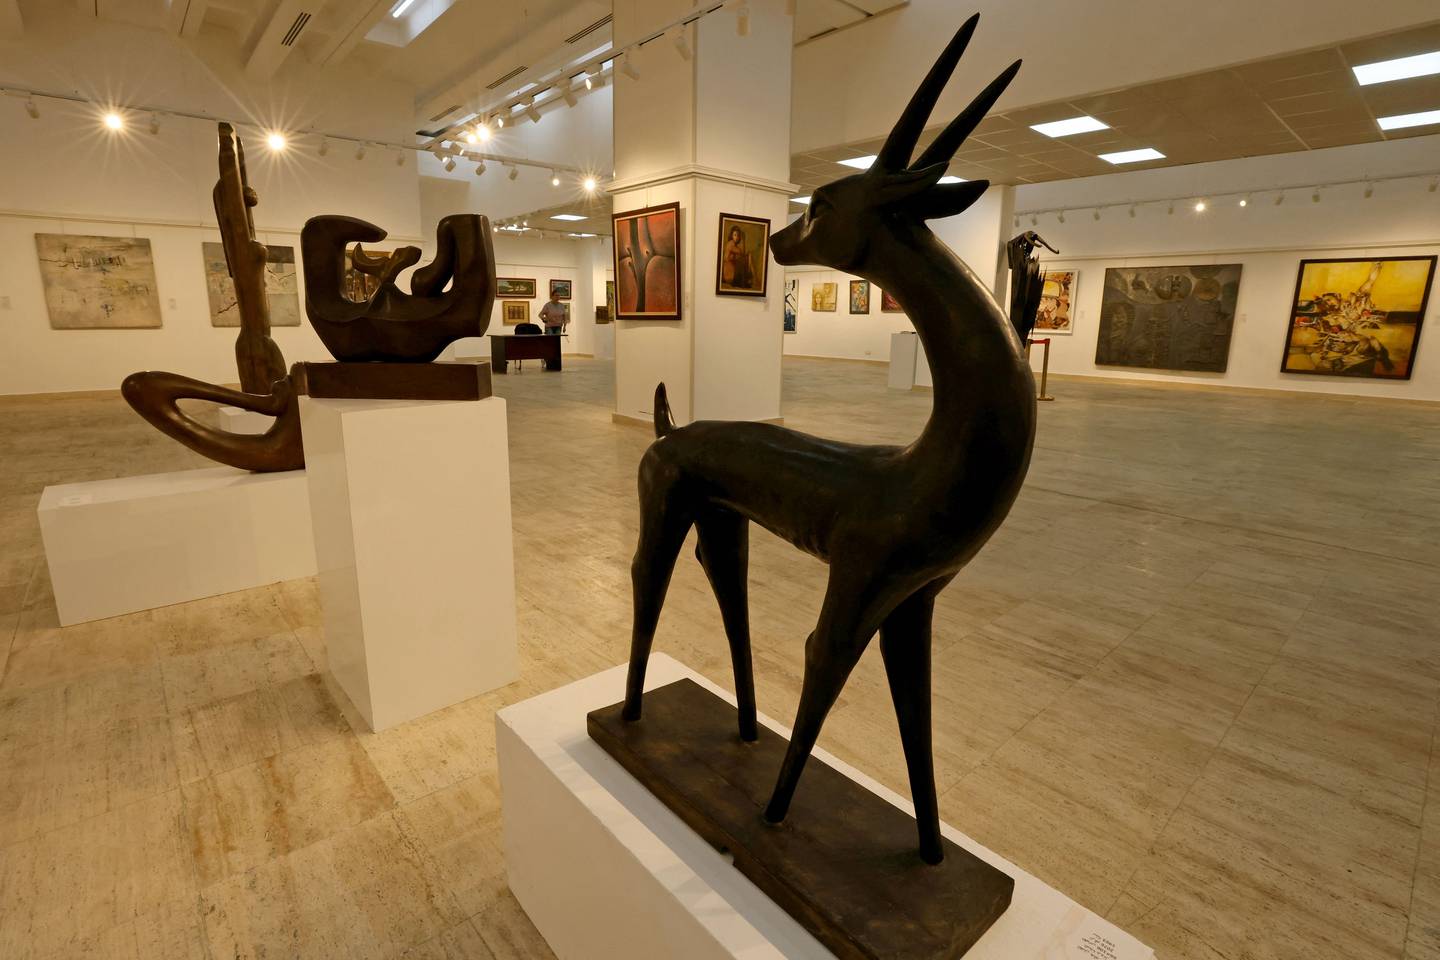 A wooden sculpture of a gazelle with undulating curves on display at Iraq's Ministry of Culture in Baghdad. AFP